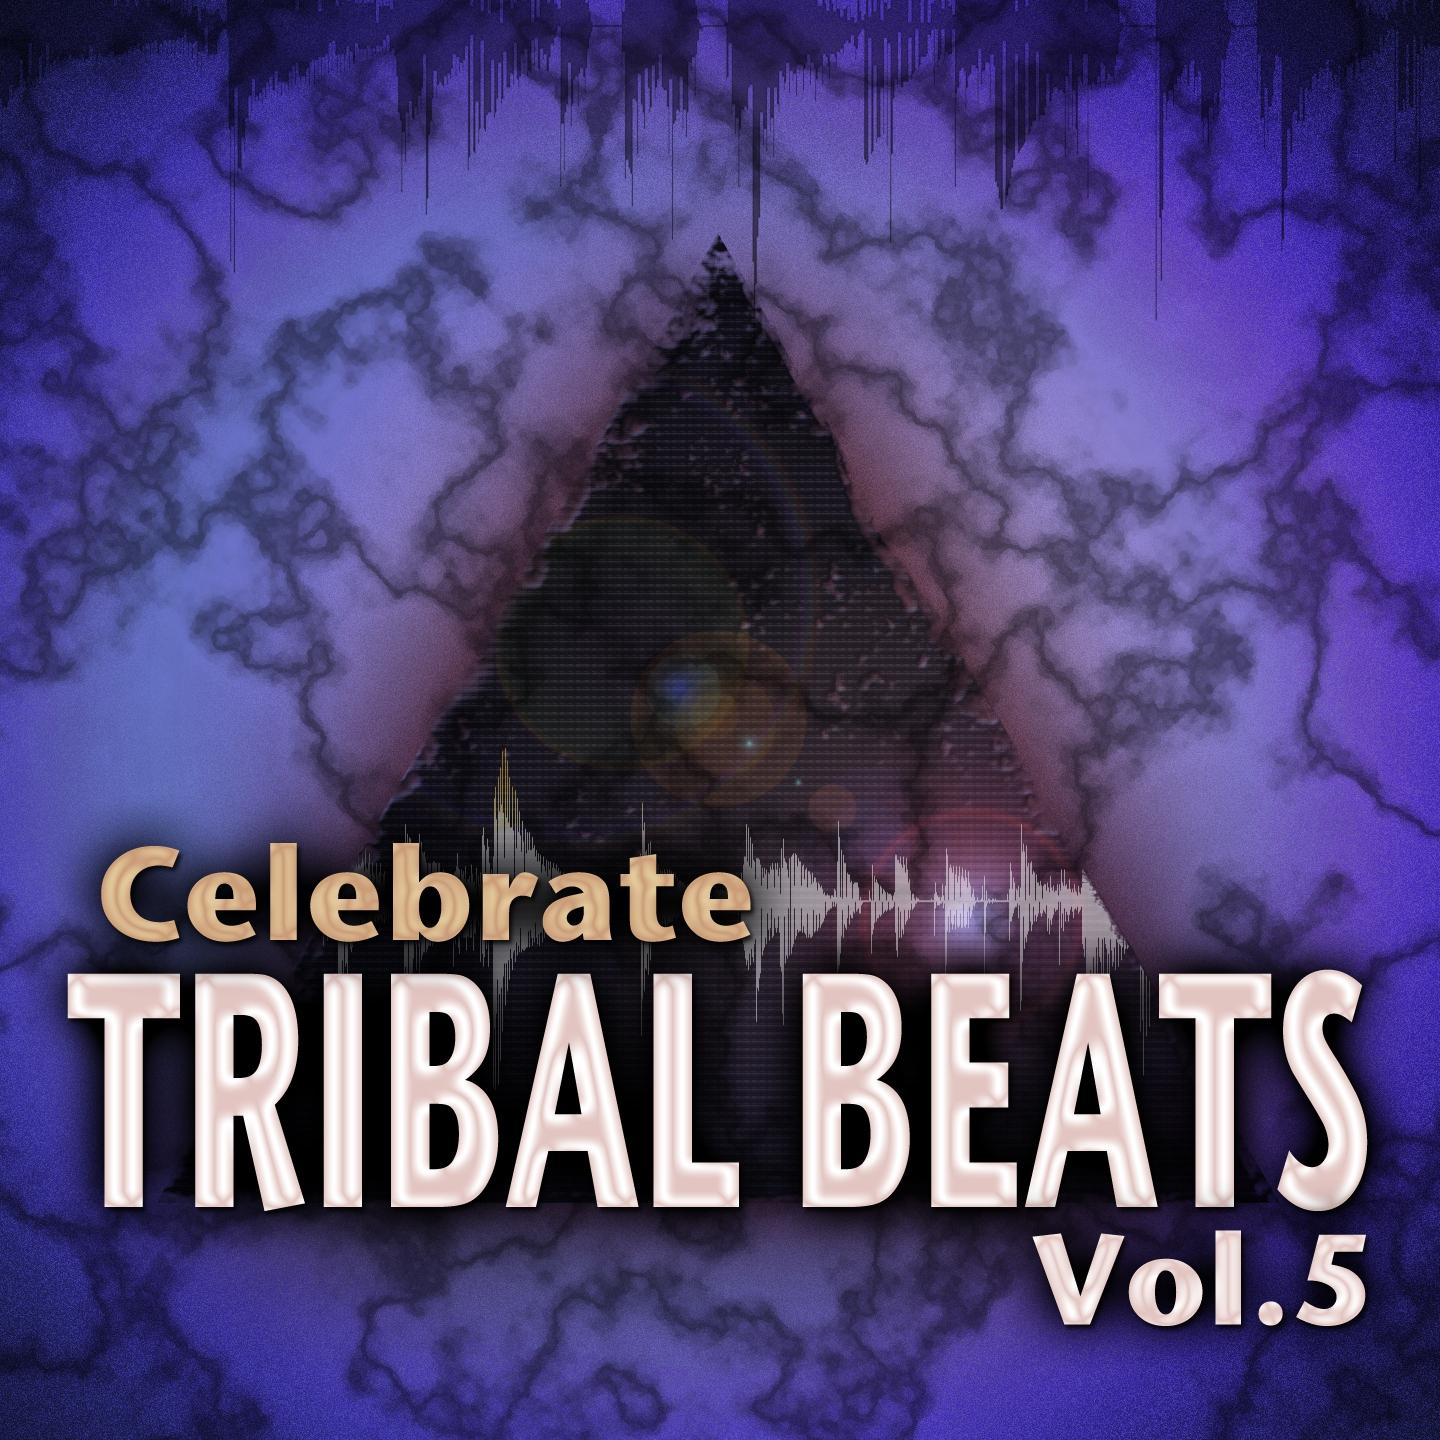 Celebrate Tribal Beats, Vol. 5 (Collection from Progressive to Tech House With Jazzy Latin Tribal Influences)